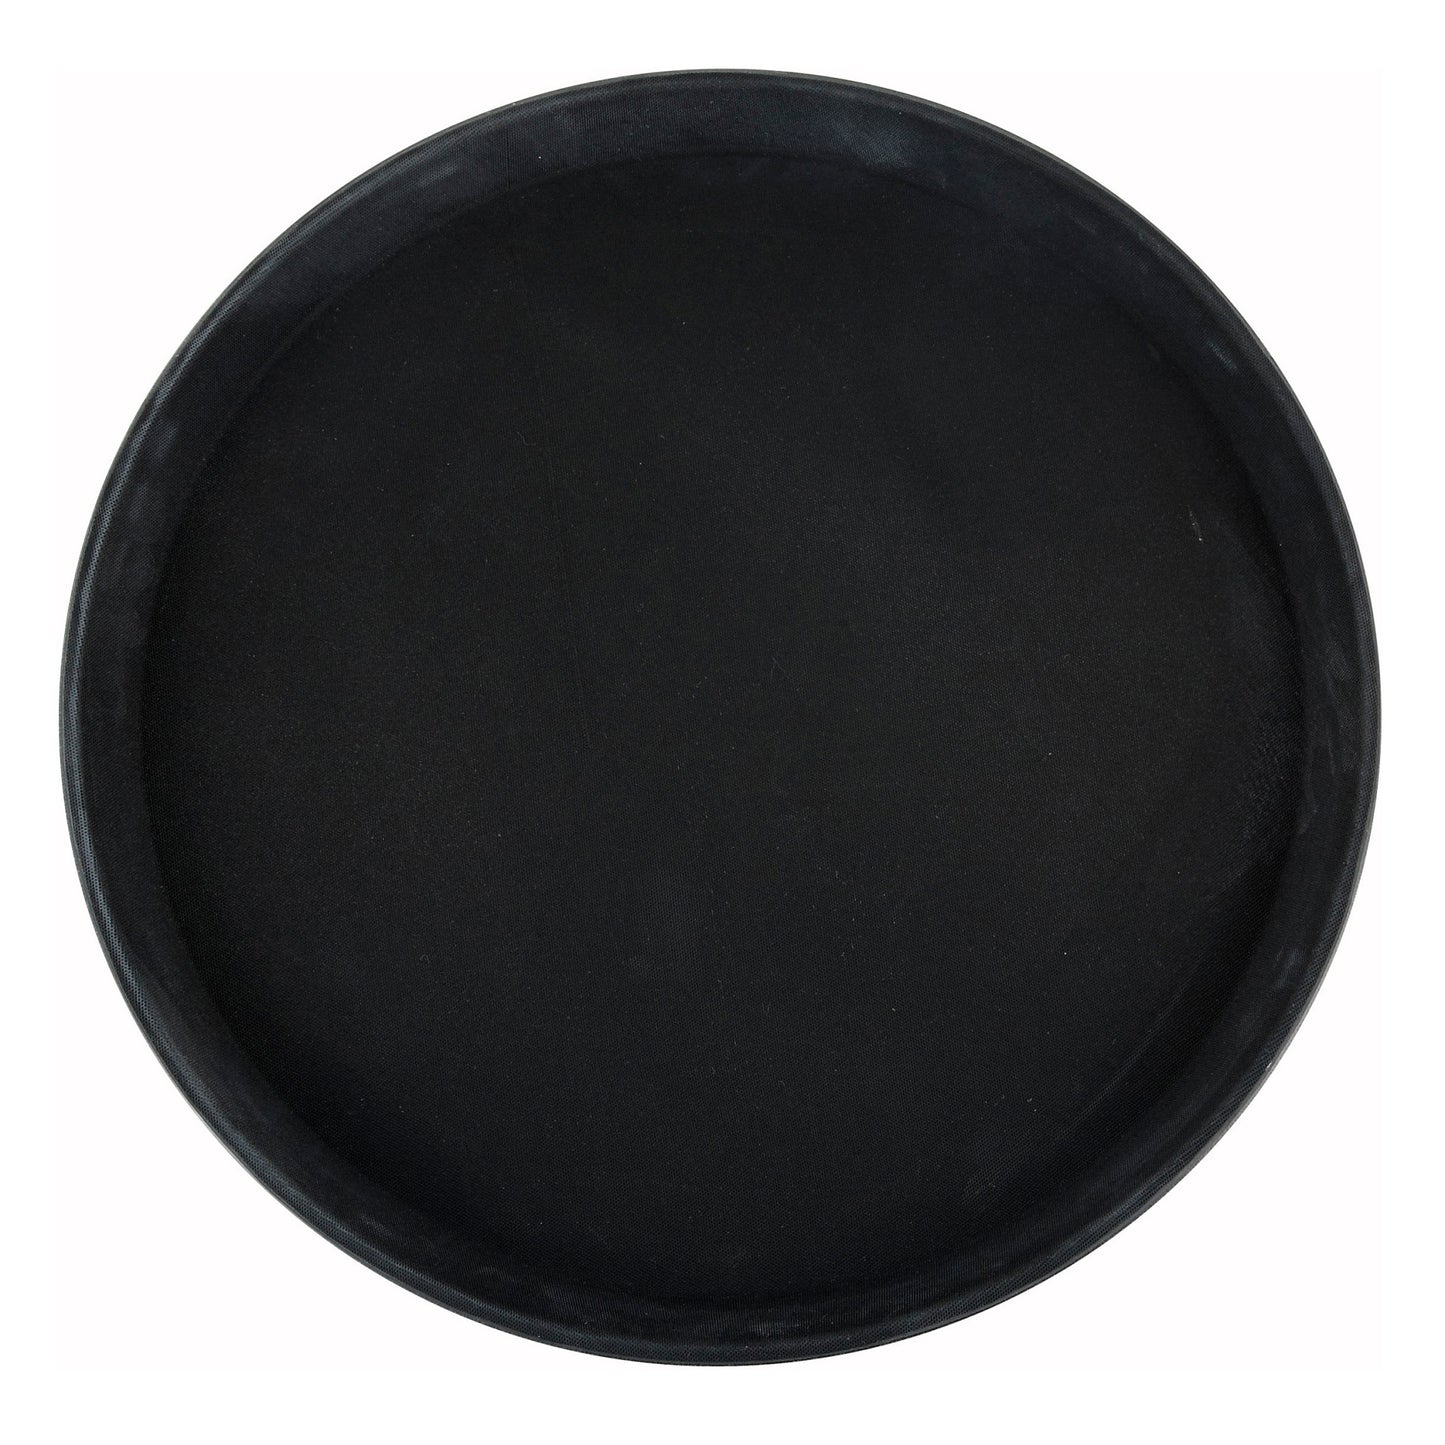 TRH-16K - Easy-Hold 16" Round Rubber-Lined Plastic Tray